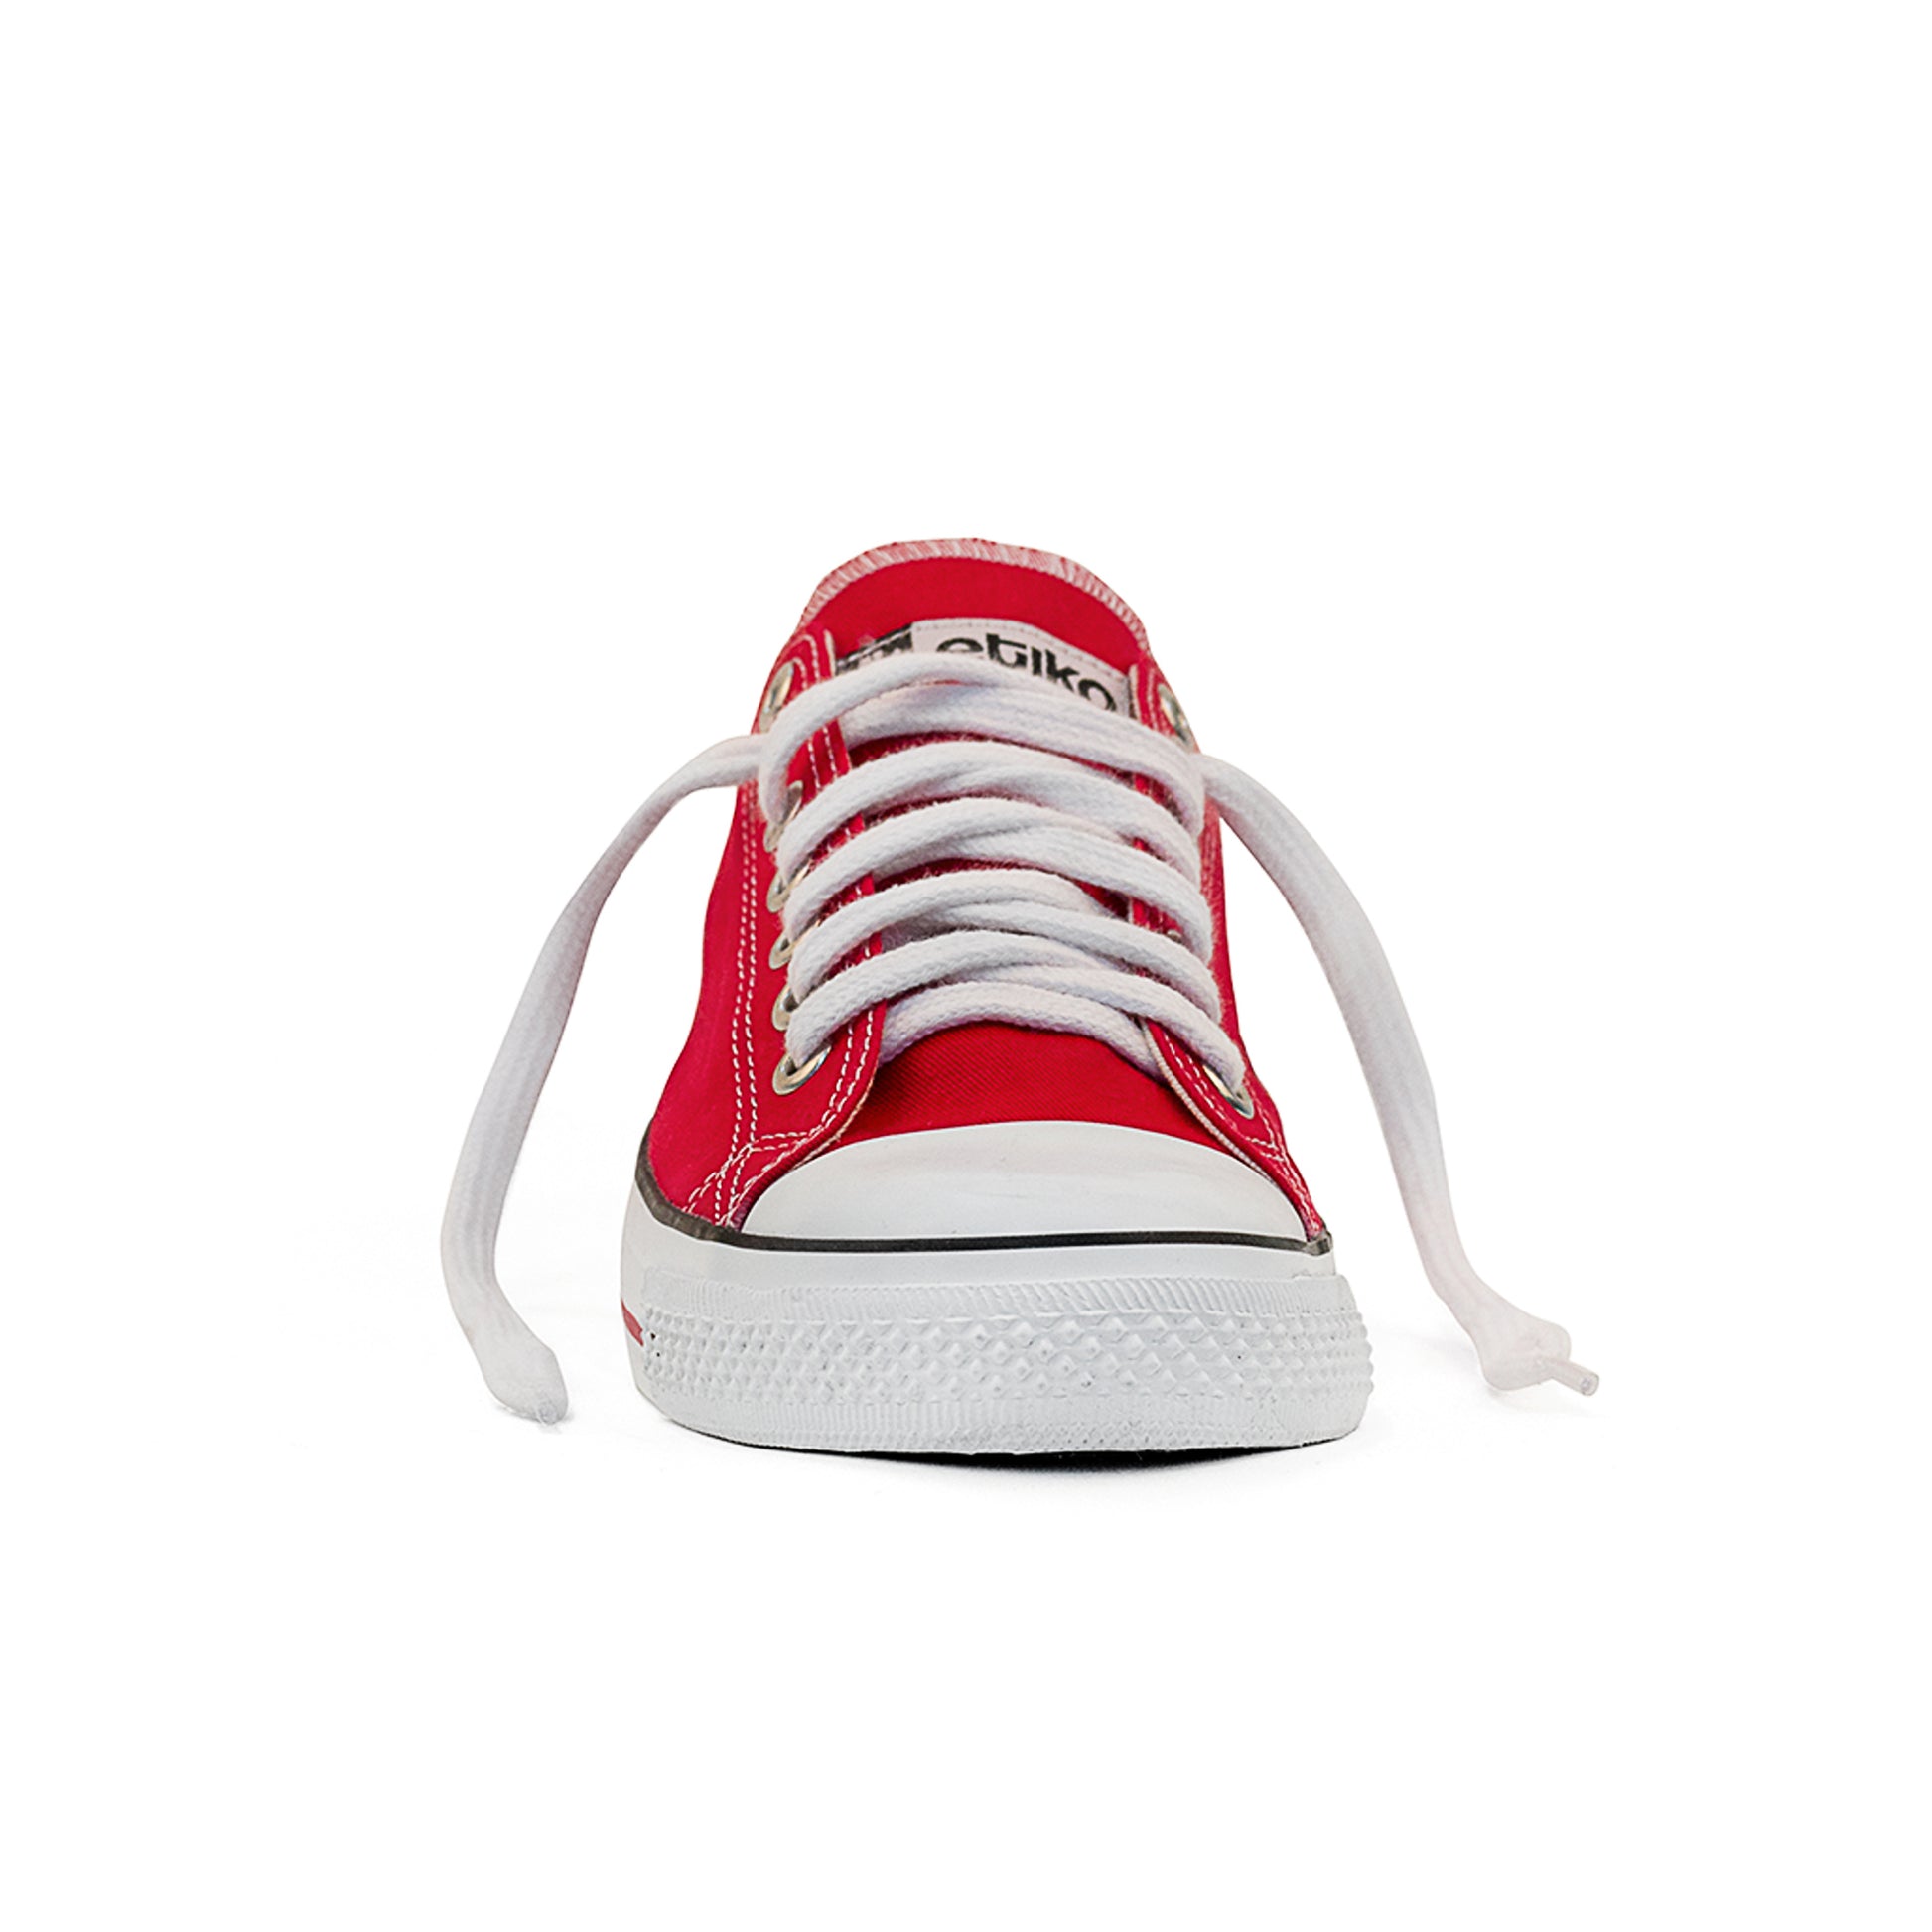 Etiko Fairtrade Certified low cut style red and white vegan, eco-friendly sneakers